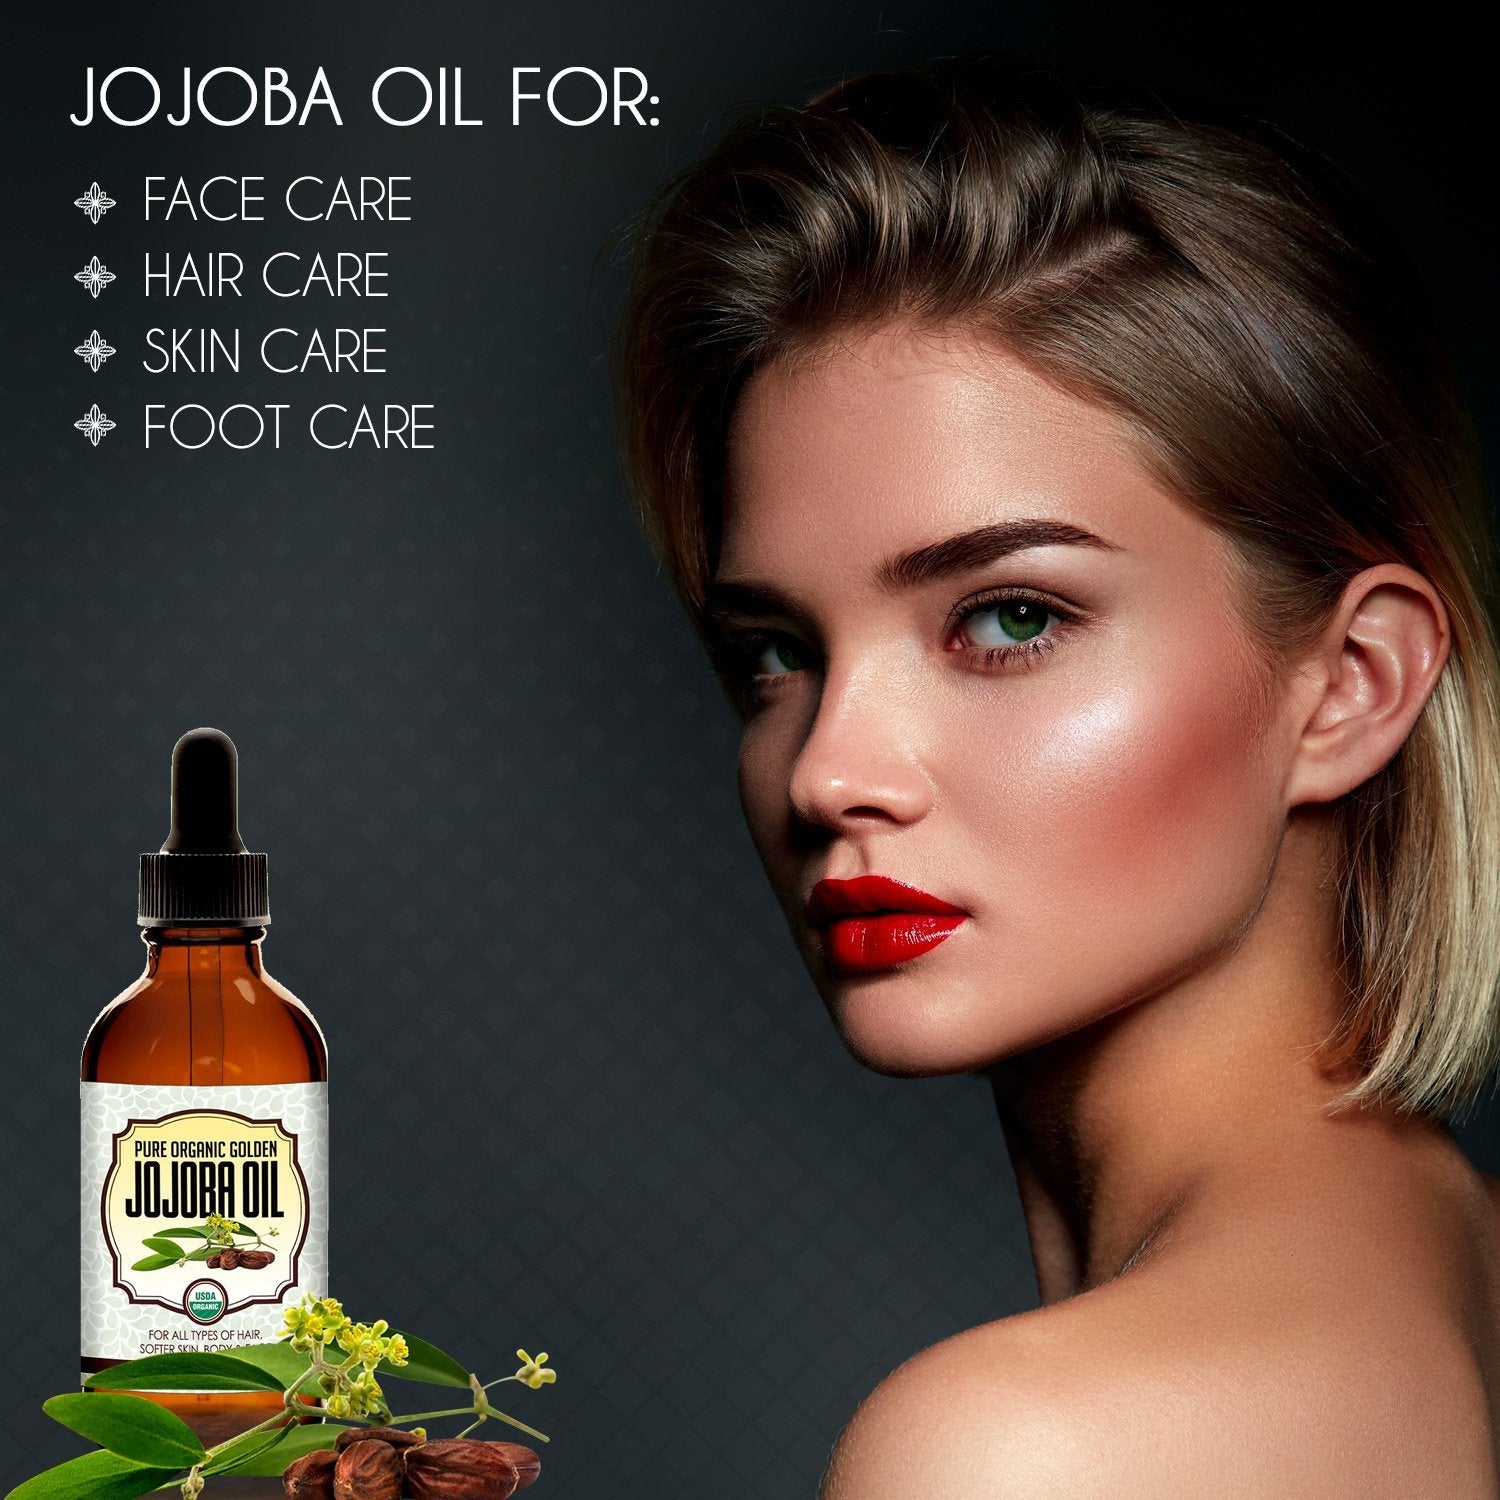 SVA Organics Jojoba Oil Organic Cold Pressed USDA Certified with Dropper 4 oz Pure Cold Pressed Unrefined Carrier Oil for Skin, Hair, Face, Massage, N